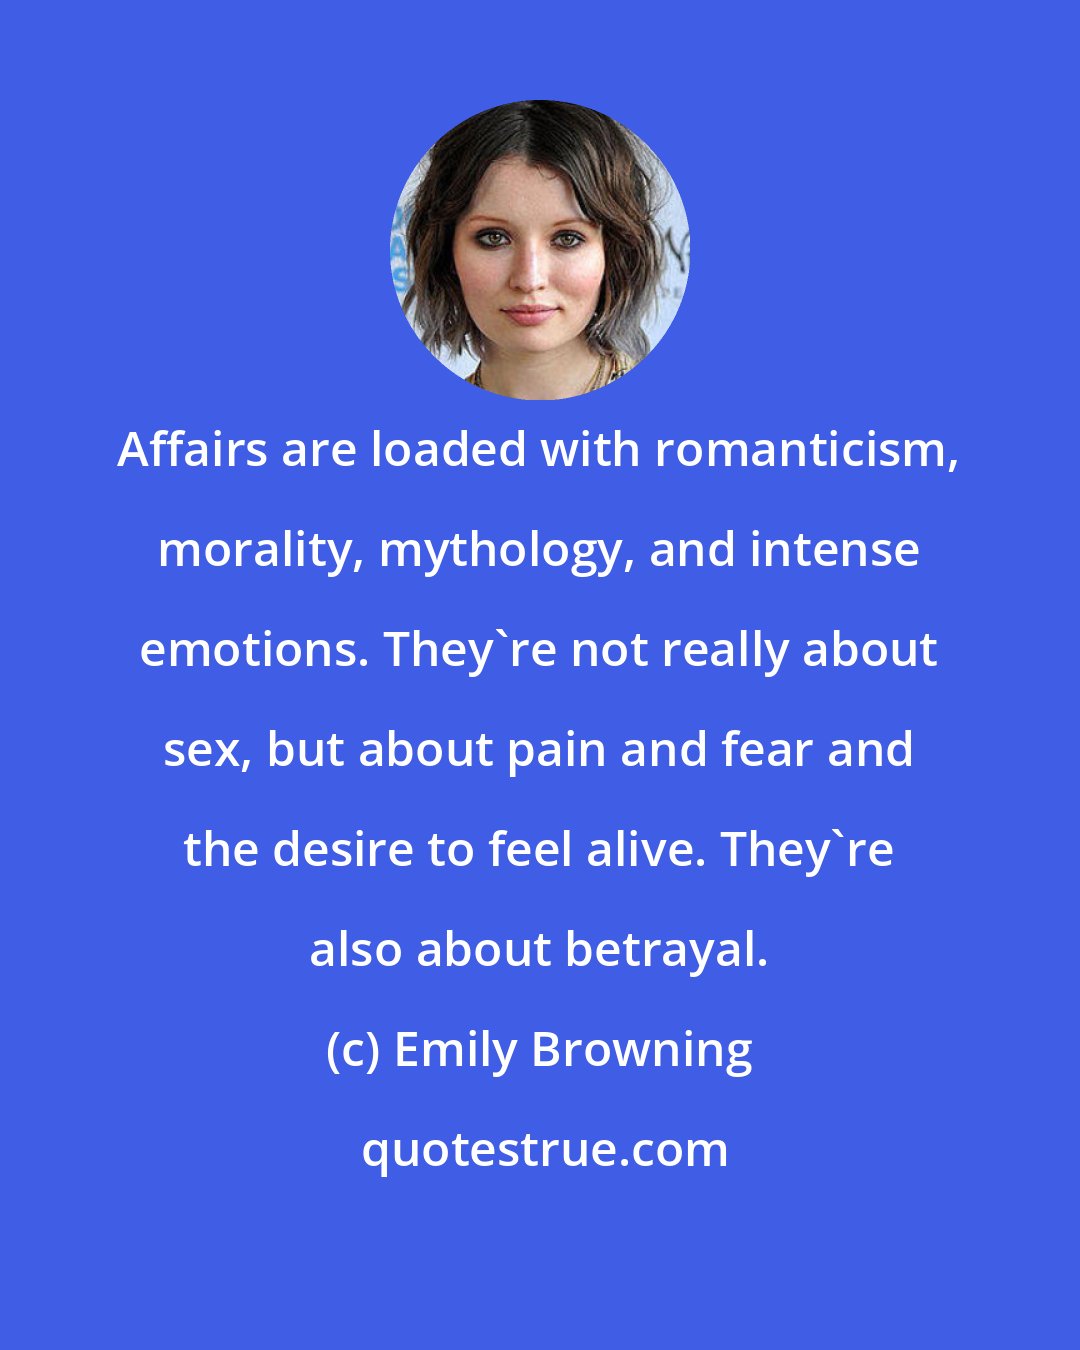 Emily Browning: Affairs are loaded with romanticism, morality, mythology, and intense emotions. They're not really about sex, but about pain and fear and the desire to feel alive. They're also about betrayal.